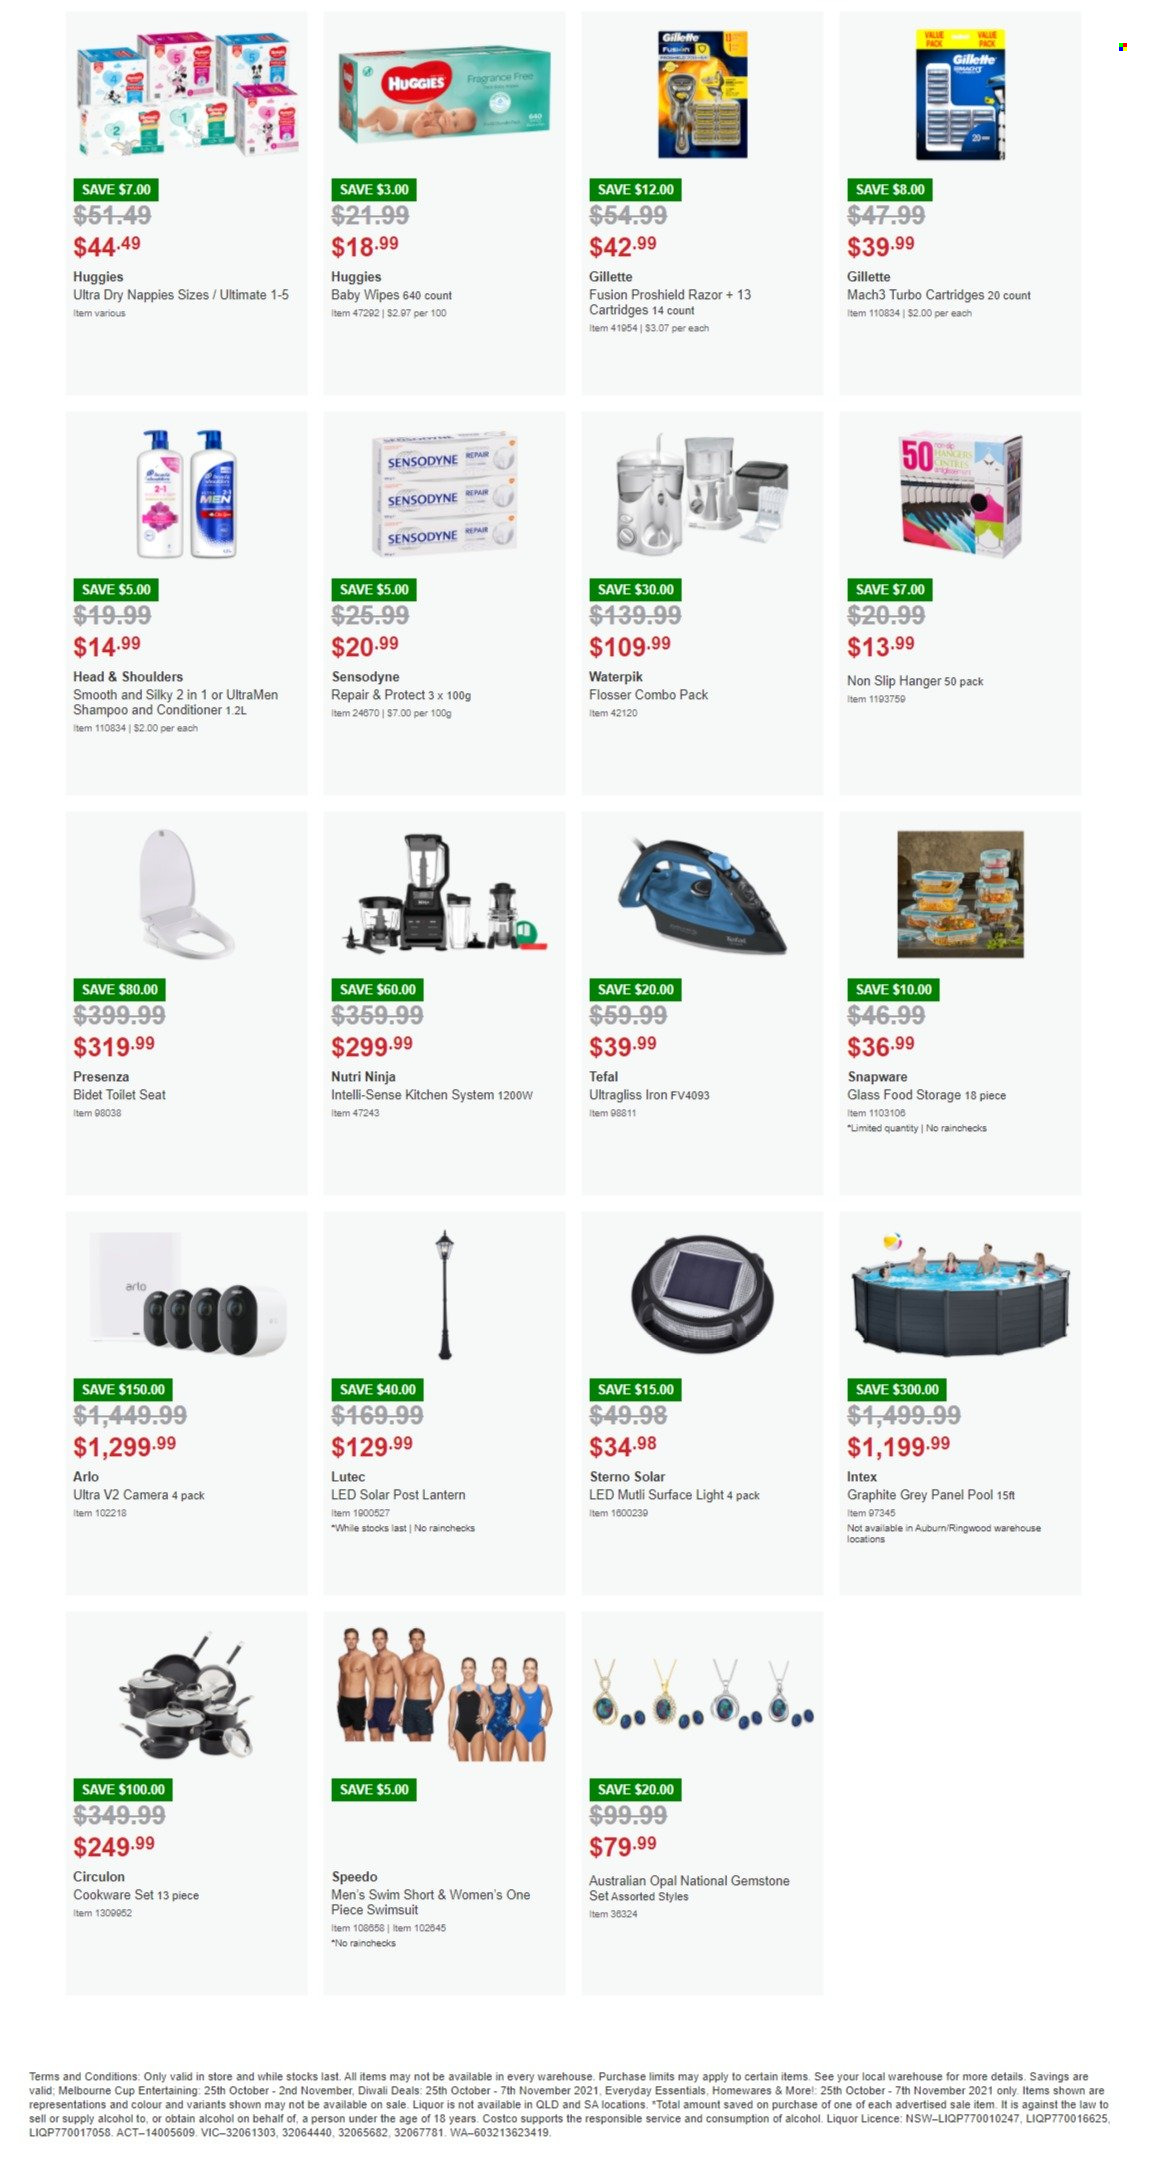 thumbnail - Costco Catalogue - Sales products - Tefal, liquor, wipes, Huggies, baby wipes, nappies, shampoo, Sensodyne, conditioner, Head & Shoulders, Gillette, razor, hanger, cookware set, cup, camera, iron, swimming suit, Speedo, Intex, toilet seat, lantern. Page 4.